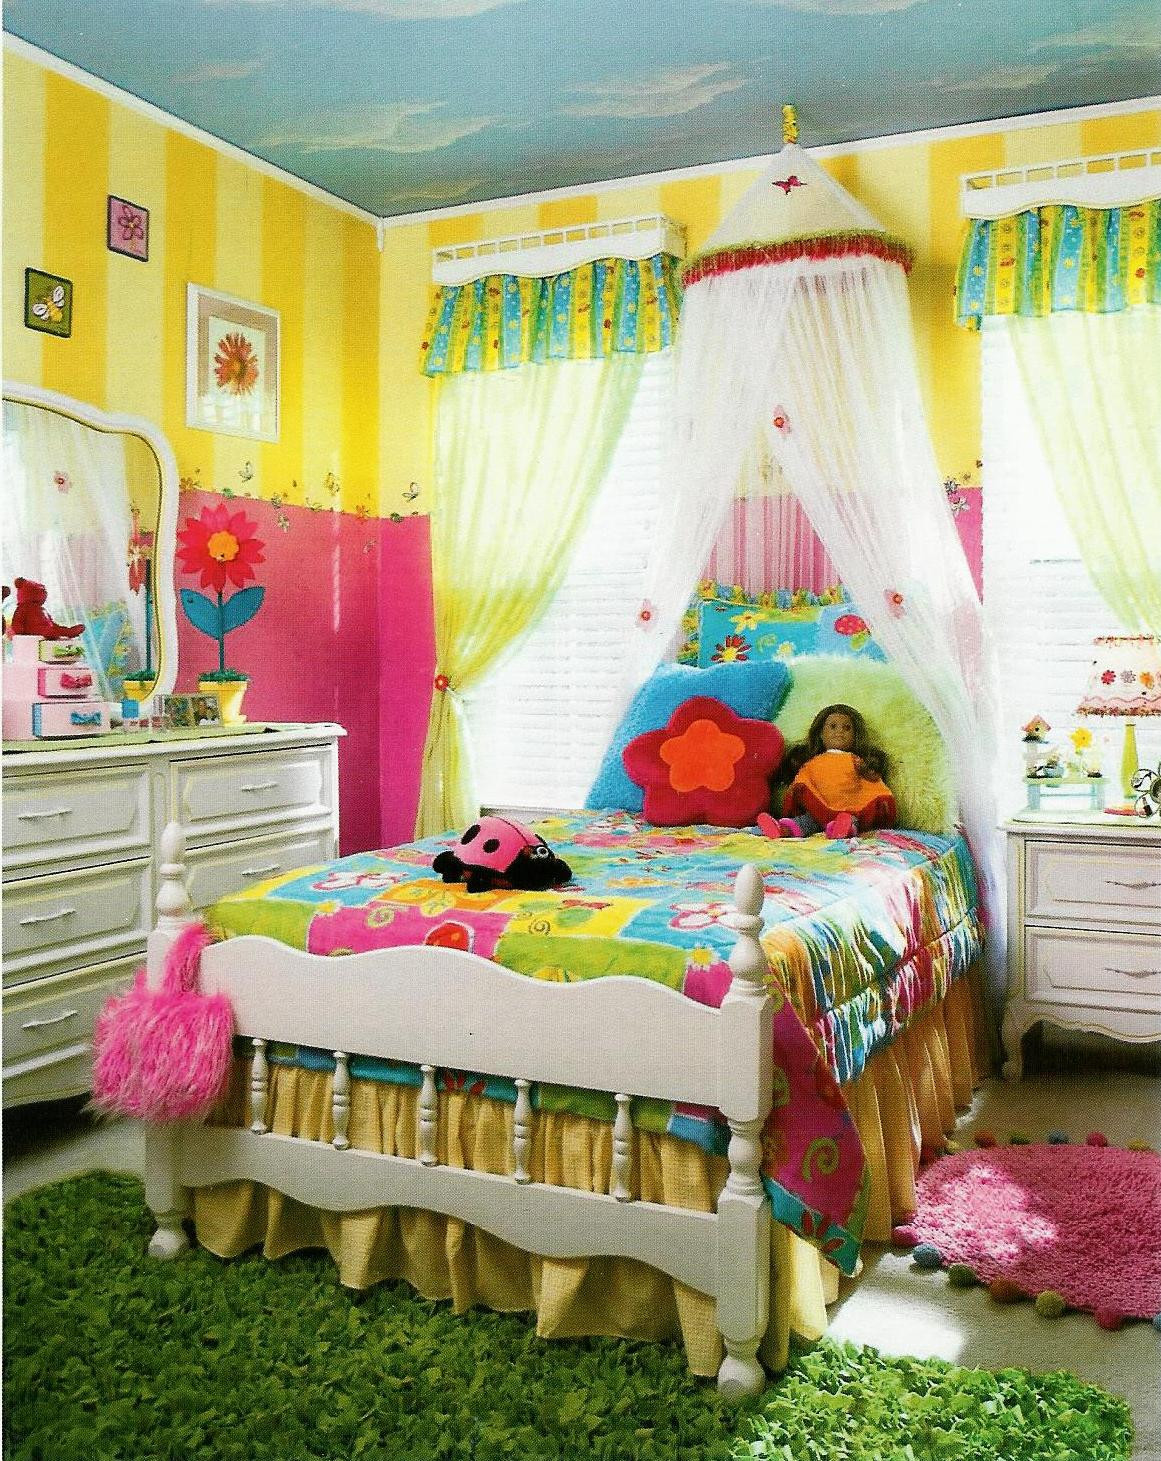 Kids Room Decor
 Tips for Decorating Kid’s Rooms